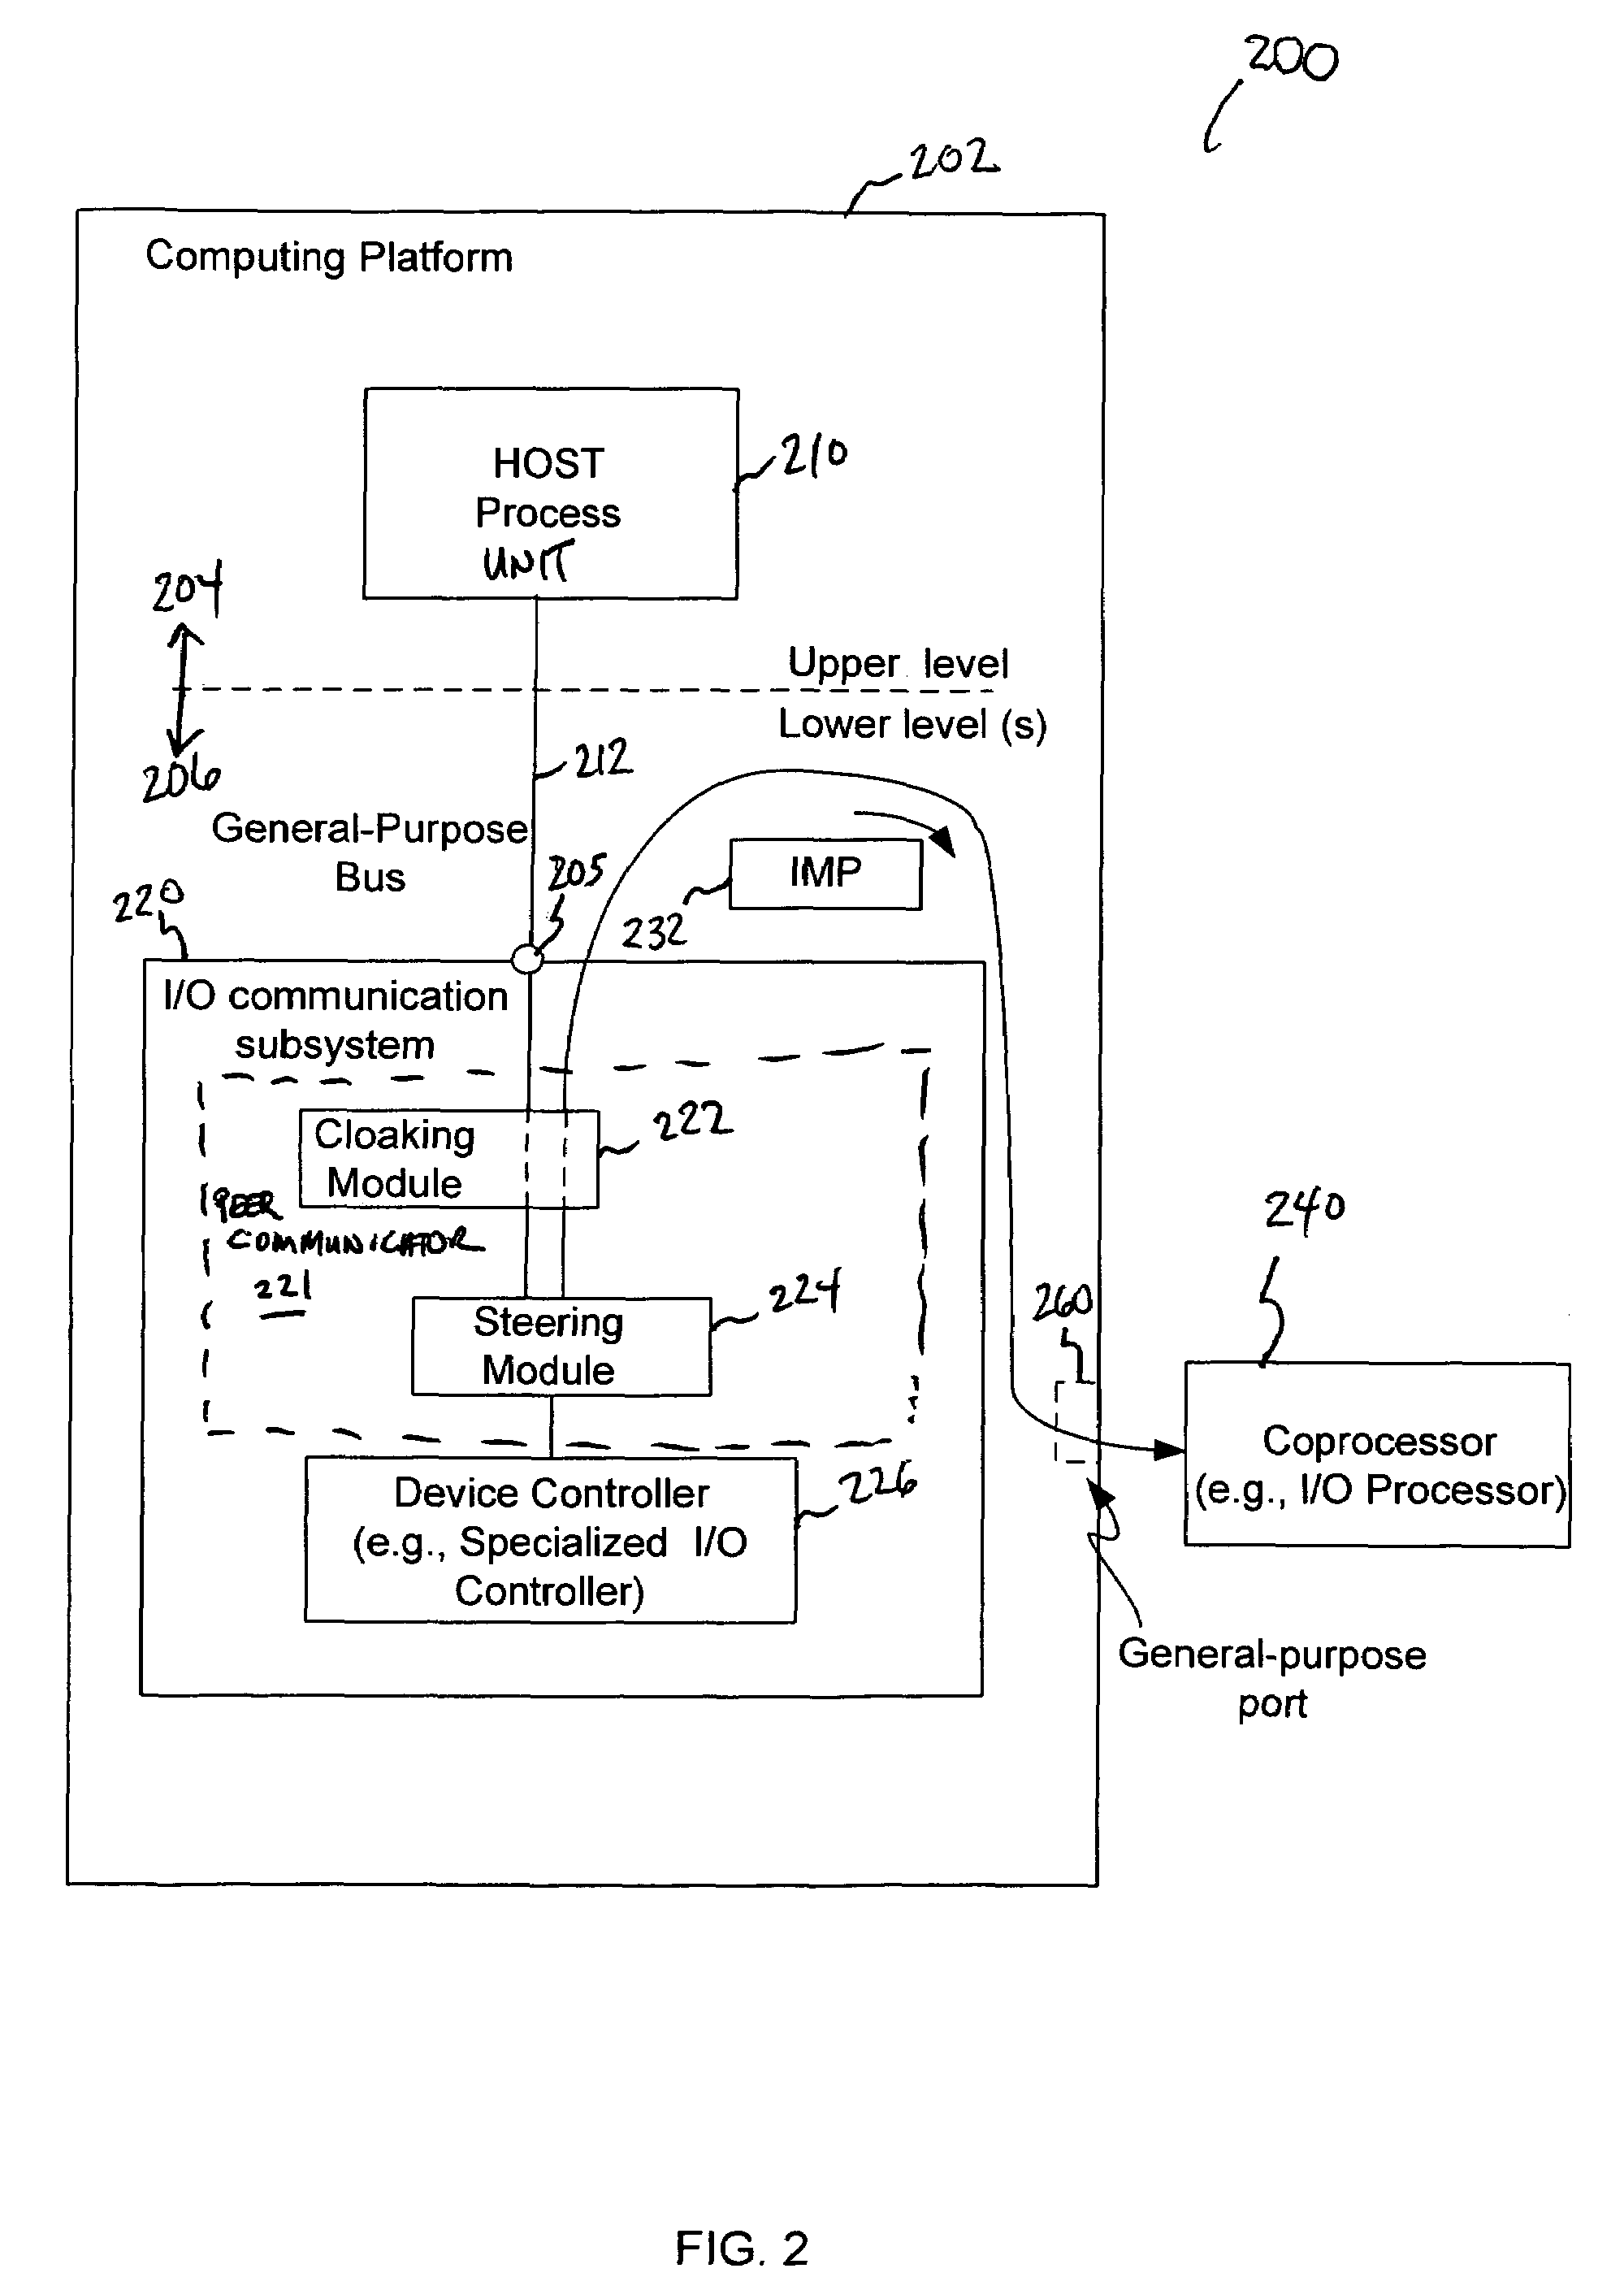 Interrupt steering in computing devices to effectuate peer-to-peer communications between device controllers and coprocessors